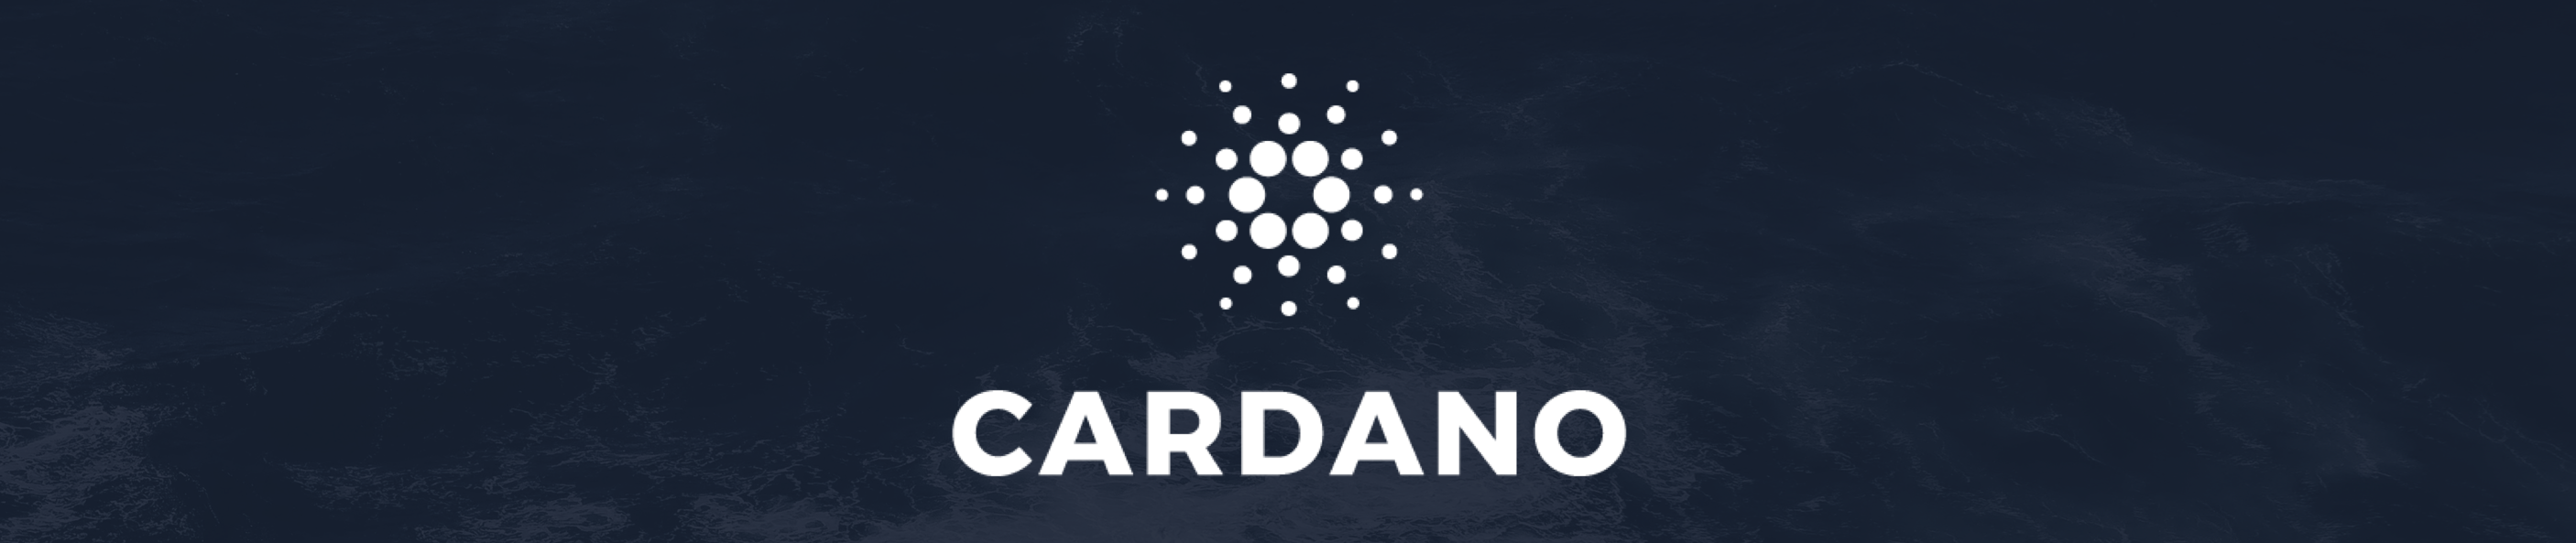 Cardano is a decentralised public blockchain and cryptocurrency project and is fully open source.